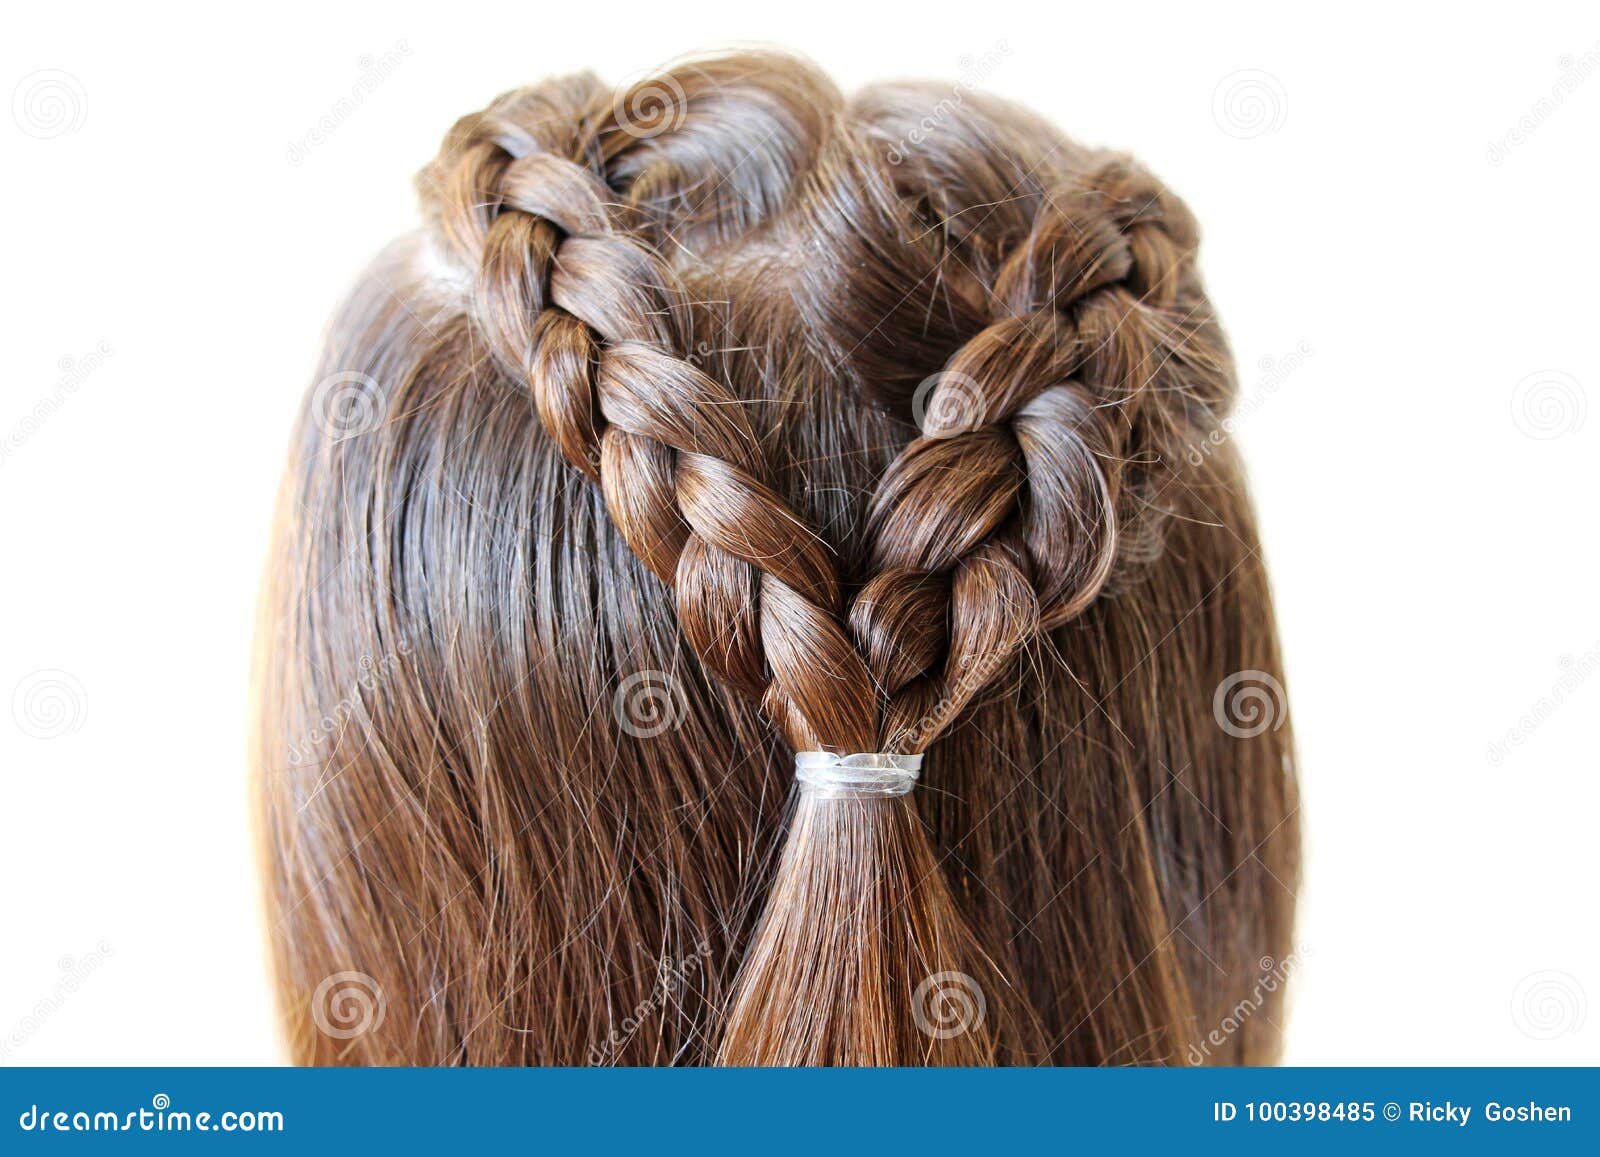 Hairstyle Braids Stock Image Image Of Style Home Photo